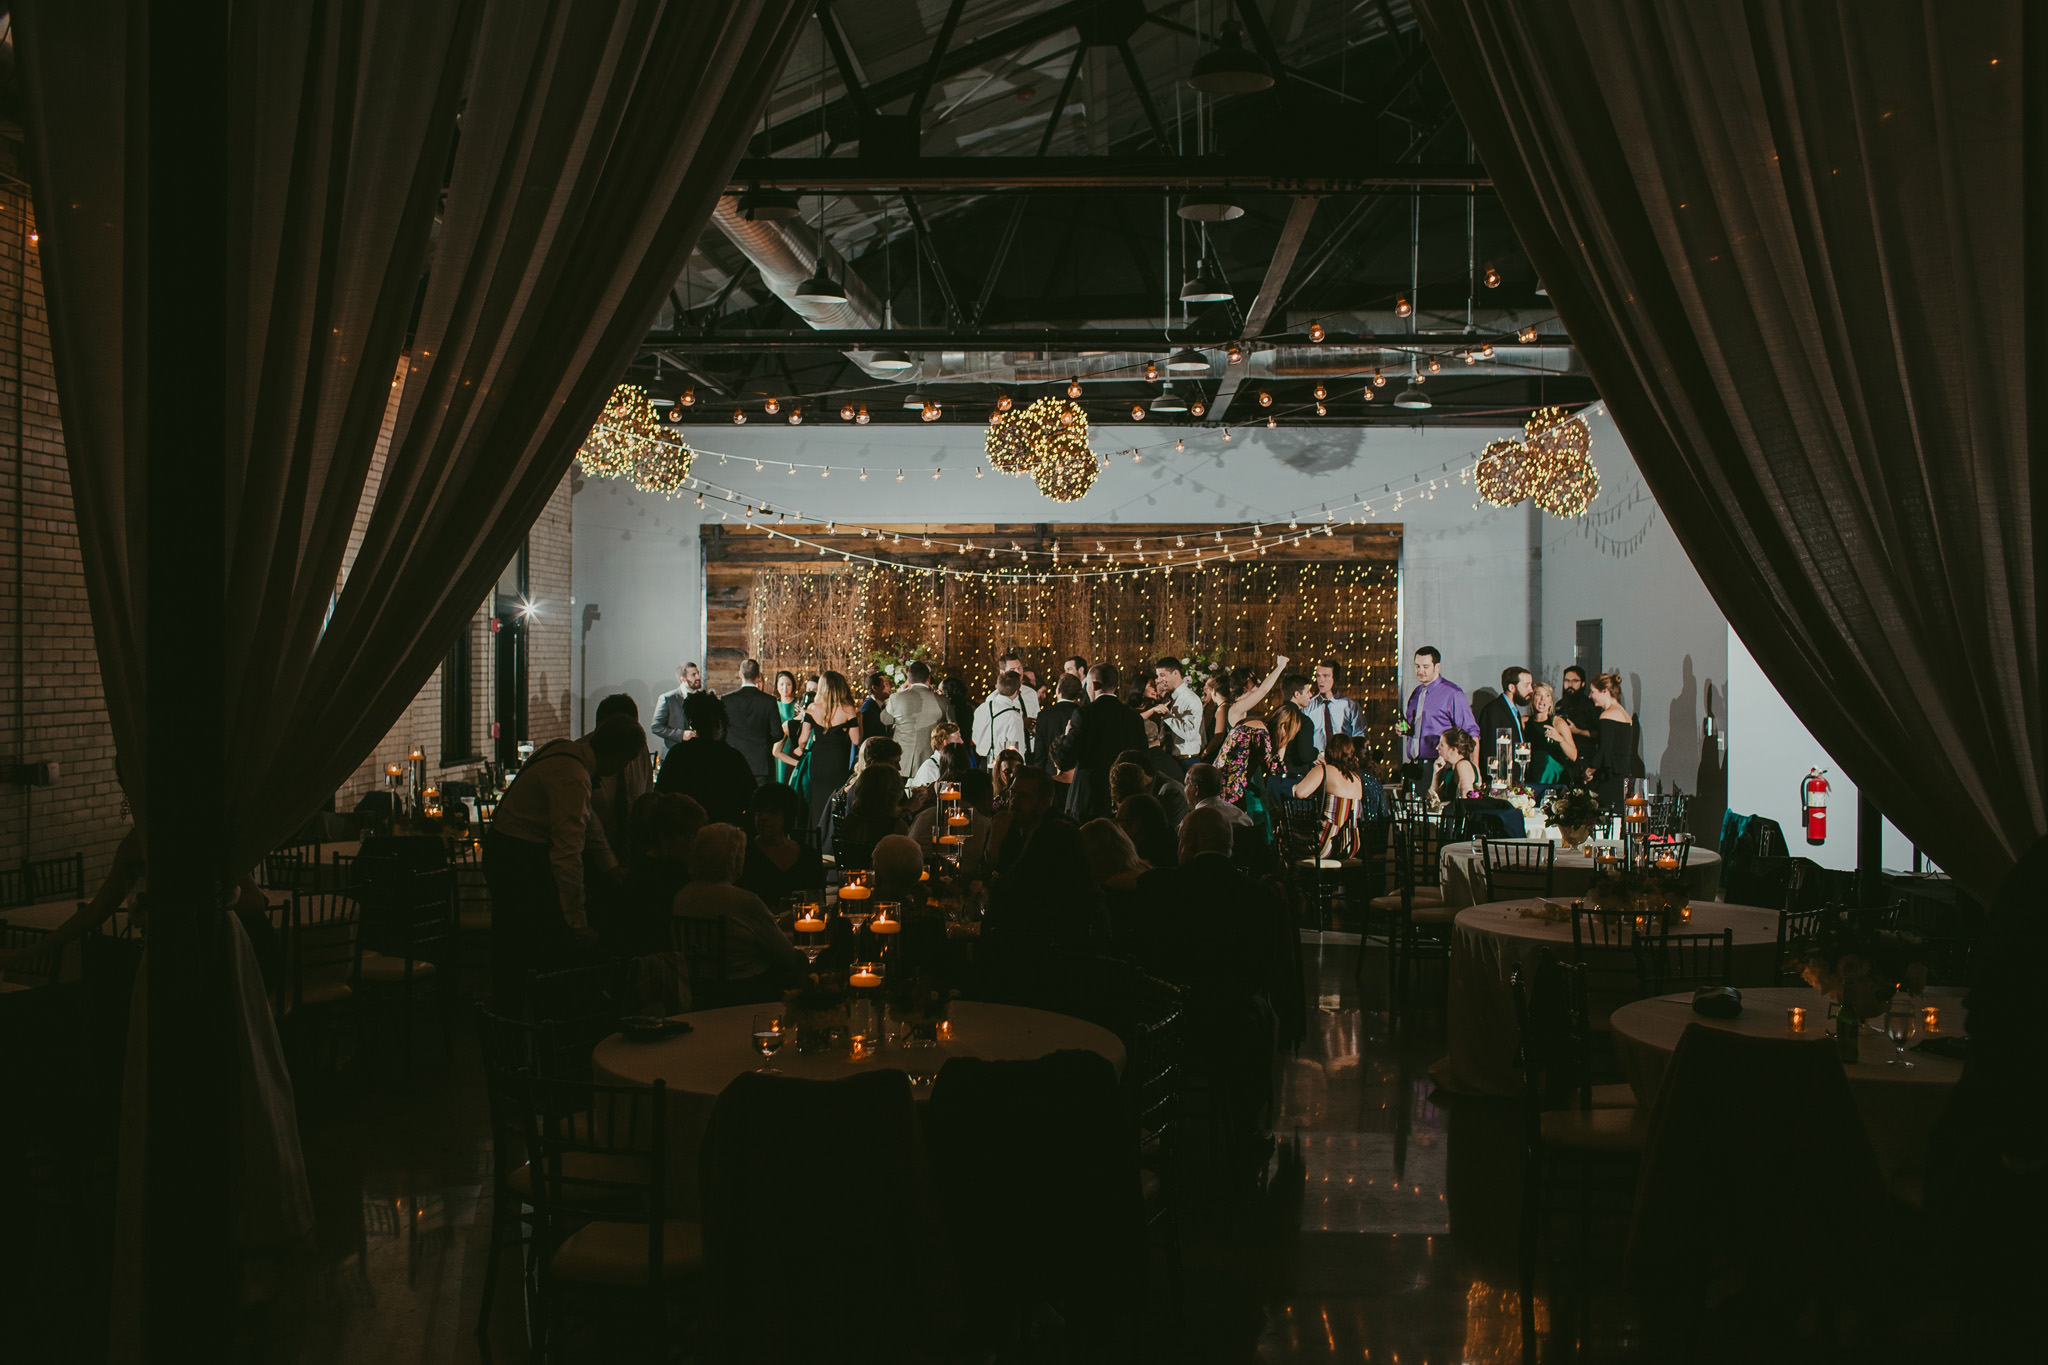 A rocking wedding reception at 214 Martin St. in Raleigh, NC